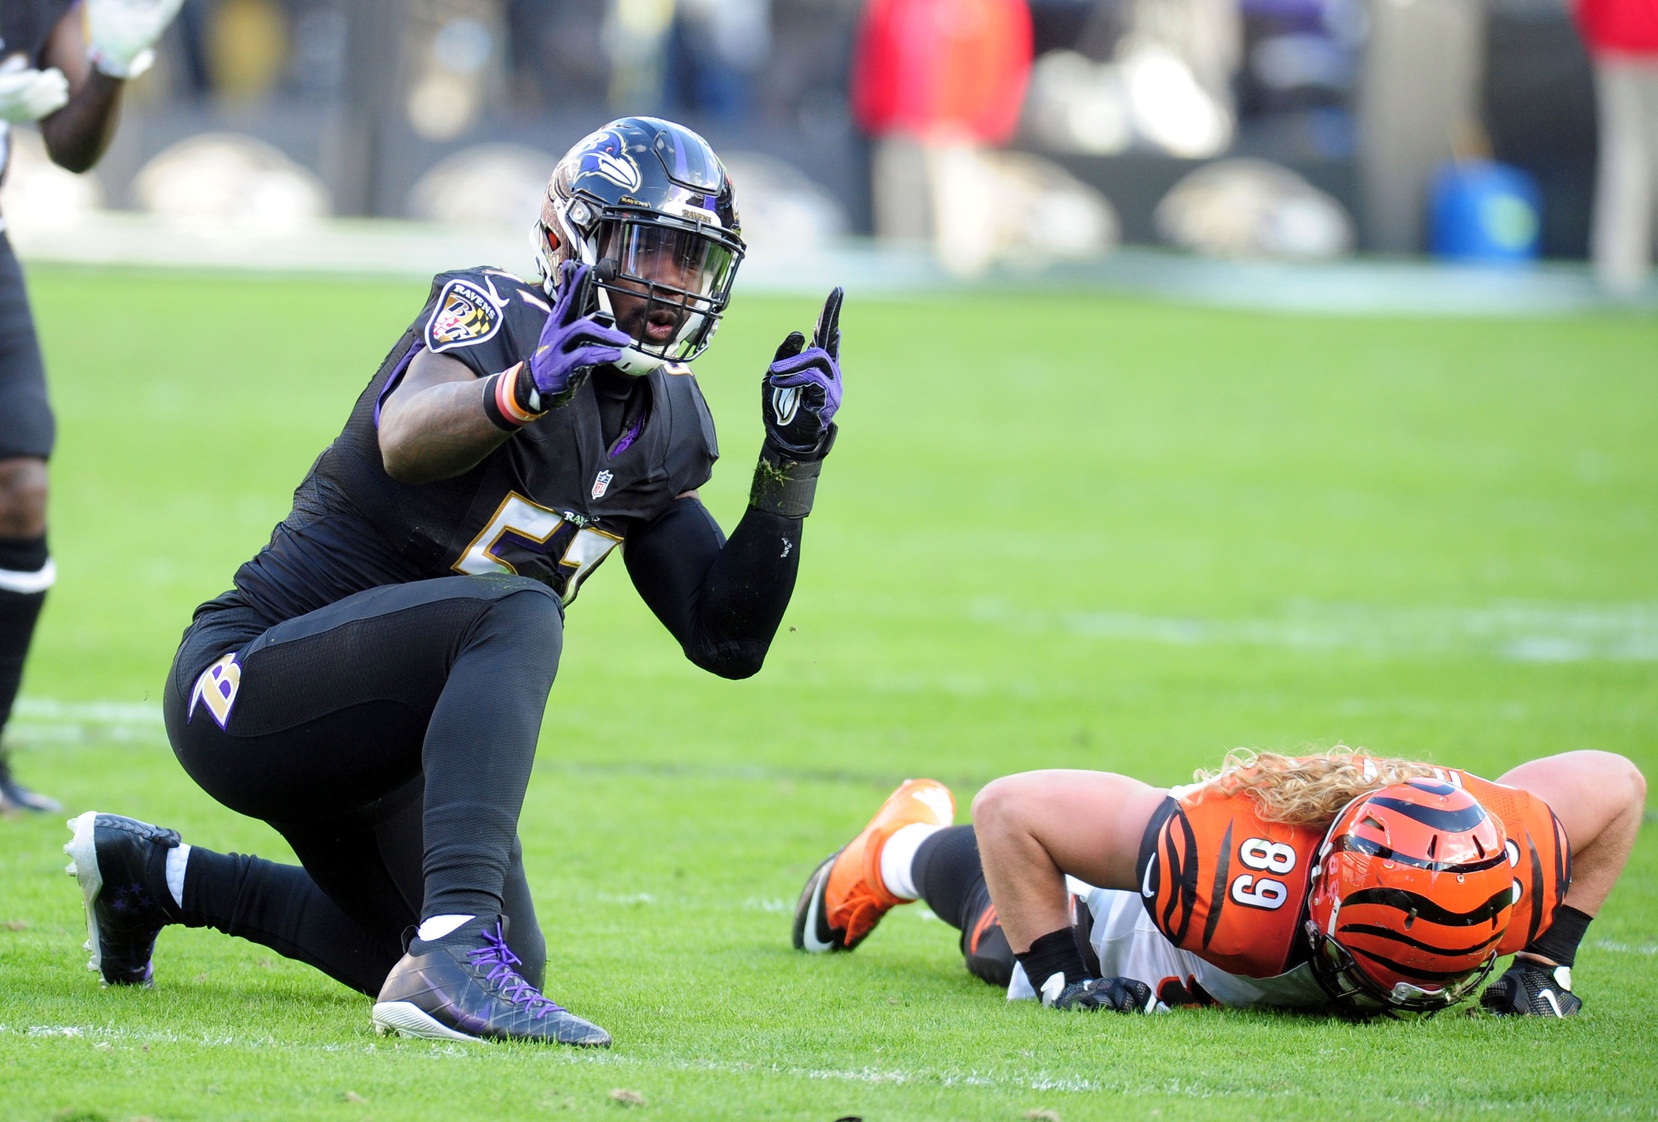 Ravens' C.J. Mosley carted off with knee injury1658 x 1122